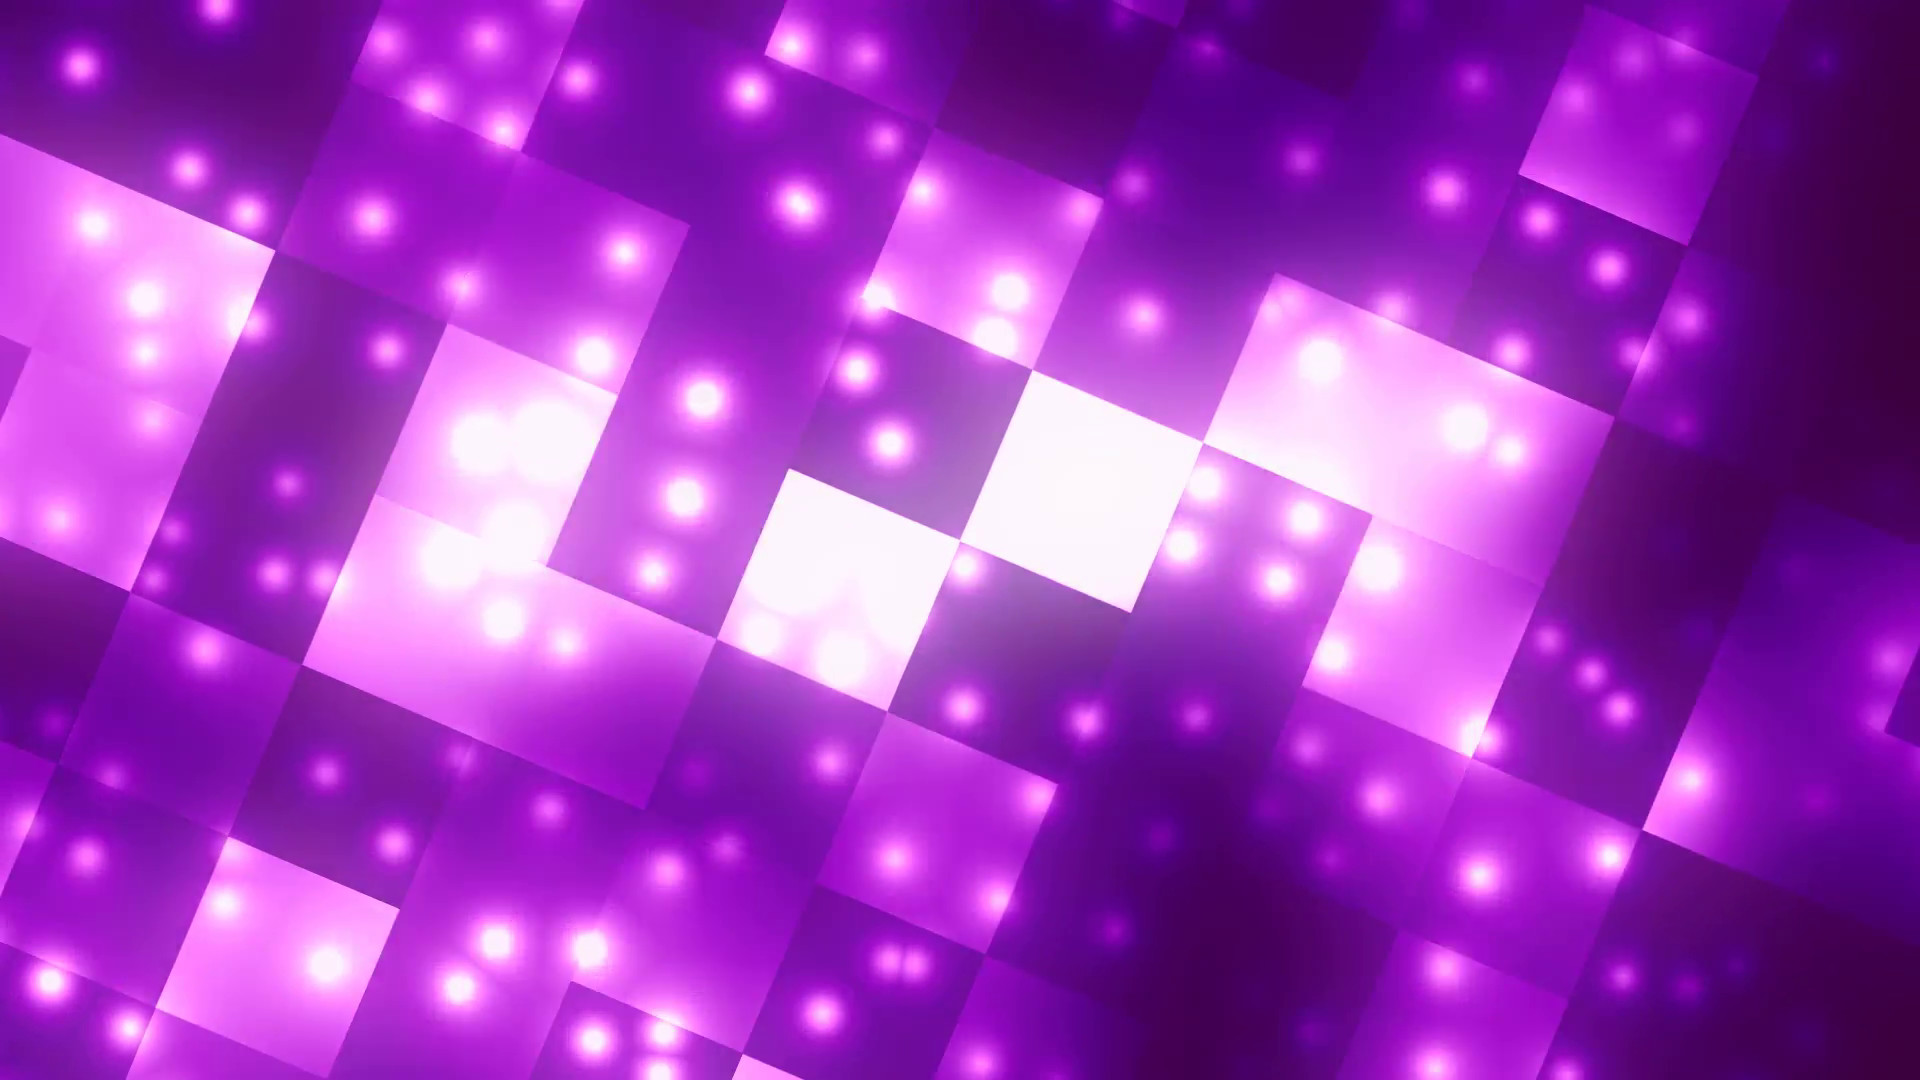 1920x1080 Dance Party Floor 1 Loopable Background Motion Background - VideoBlocks